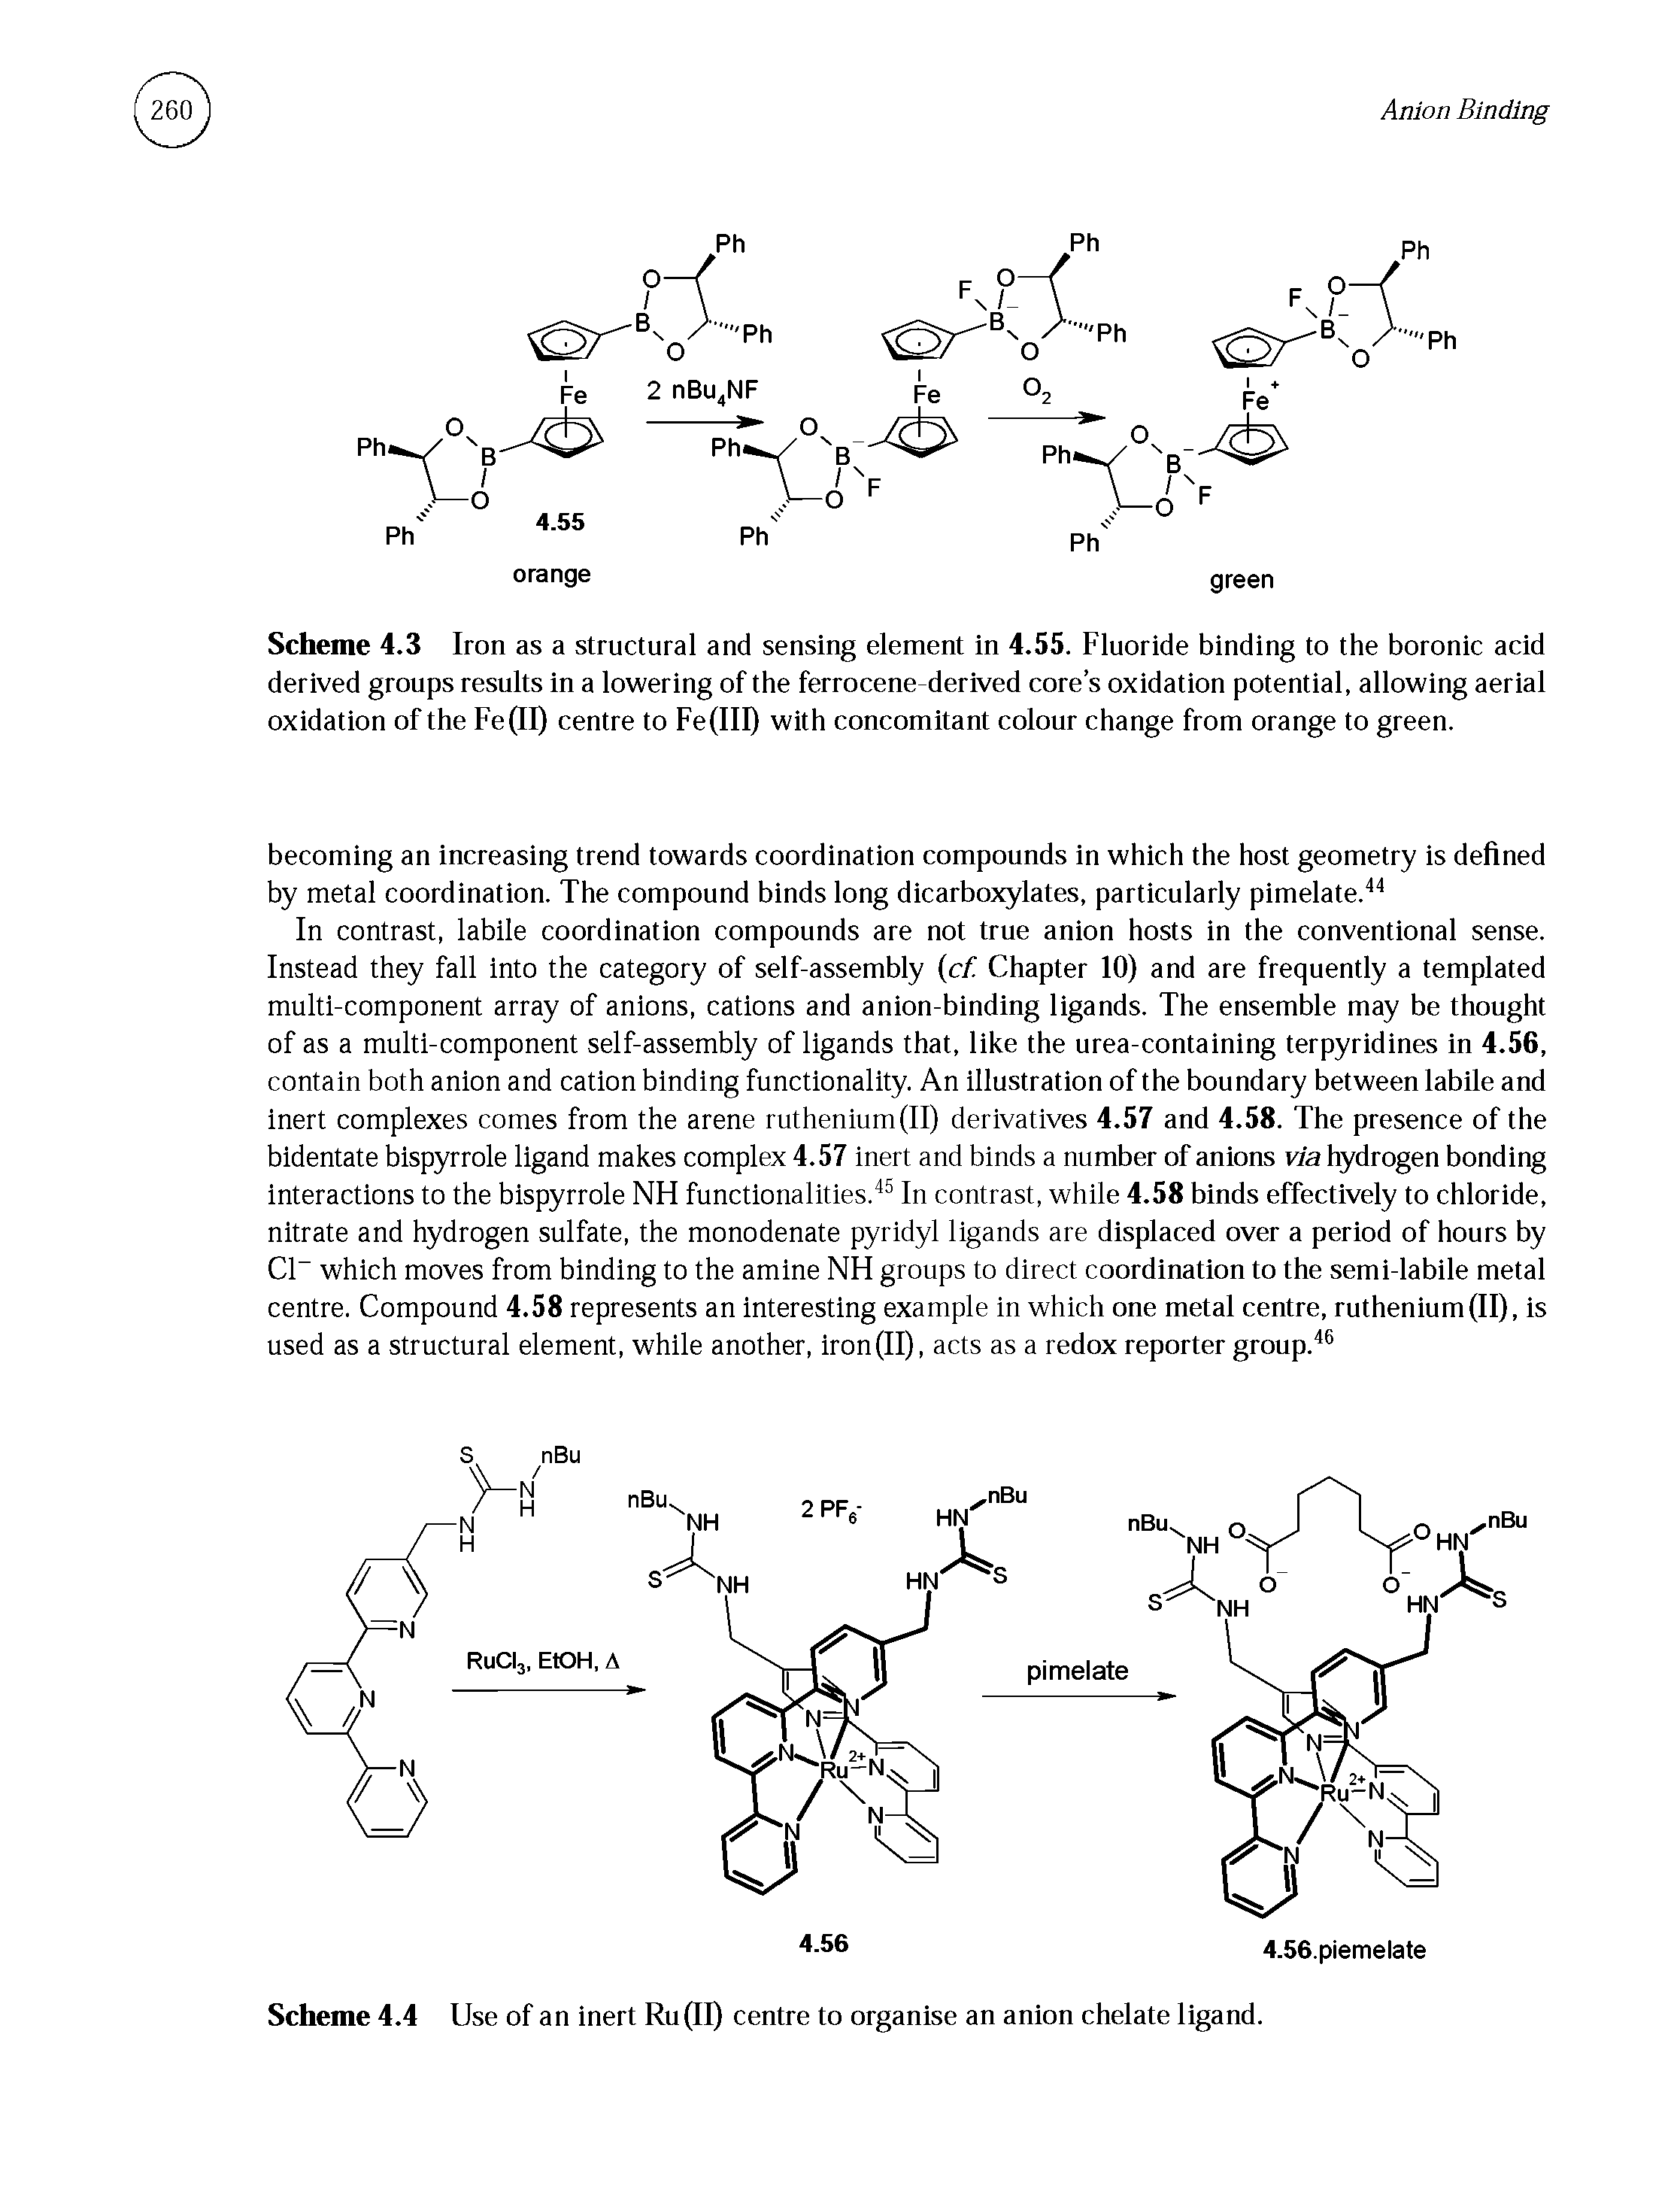 Scheme 4.3 Iron as a structural and sensing element in 4.55. Fluoride binding to the boronic acid derived groups results in a lowering of the ferrocene-derived core s oxidation potential, allowing aerial oxidation of the Fe(II) centre to Fe (III) with concomitant colour change from orange to green.